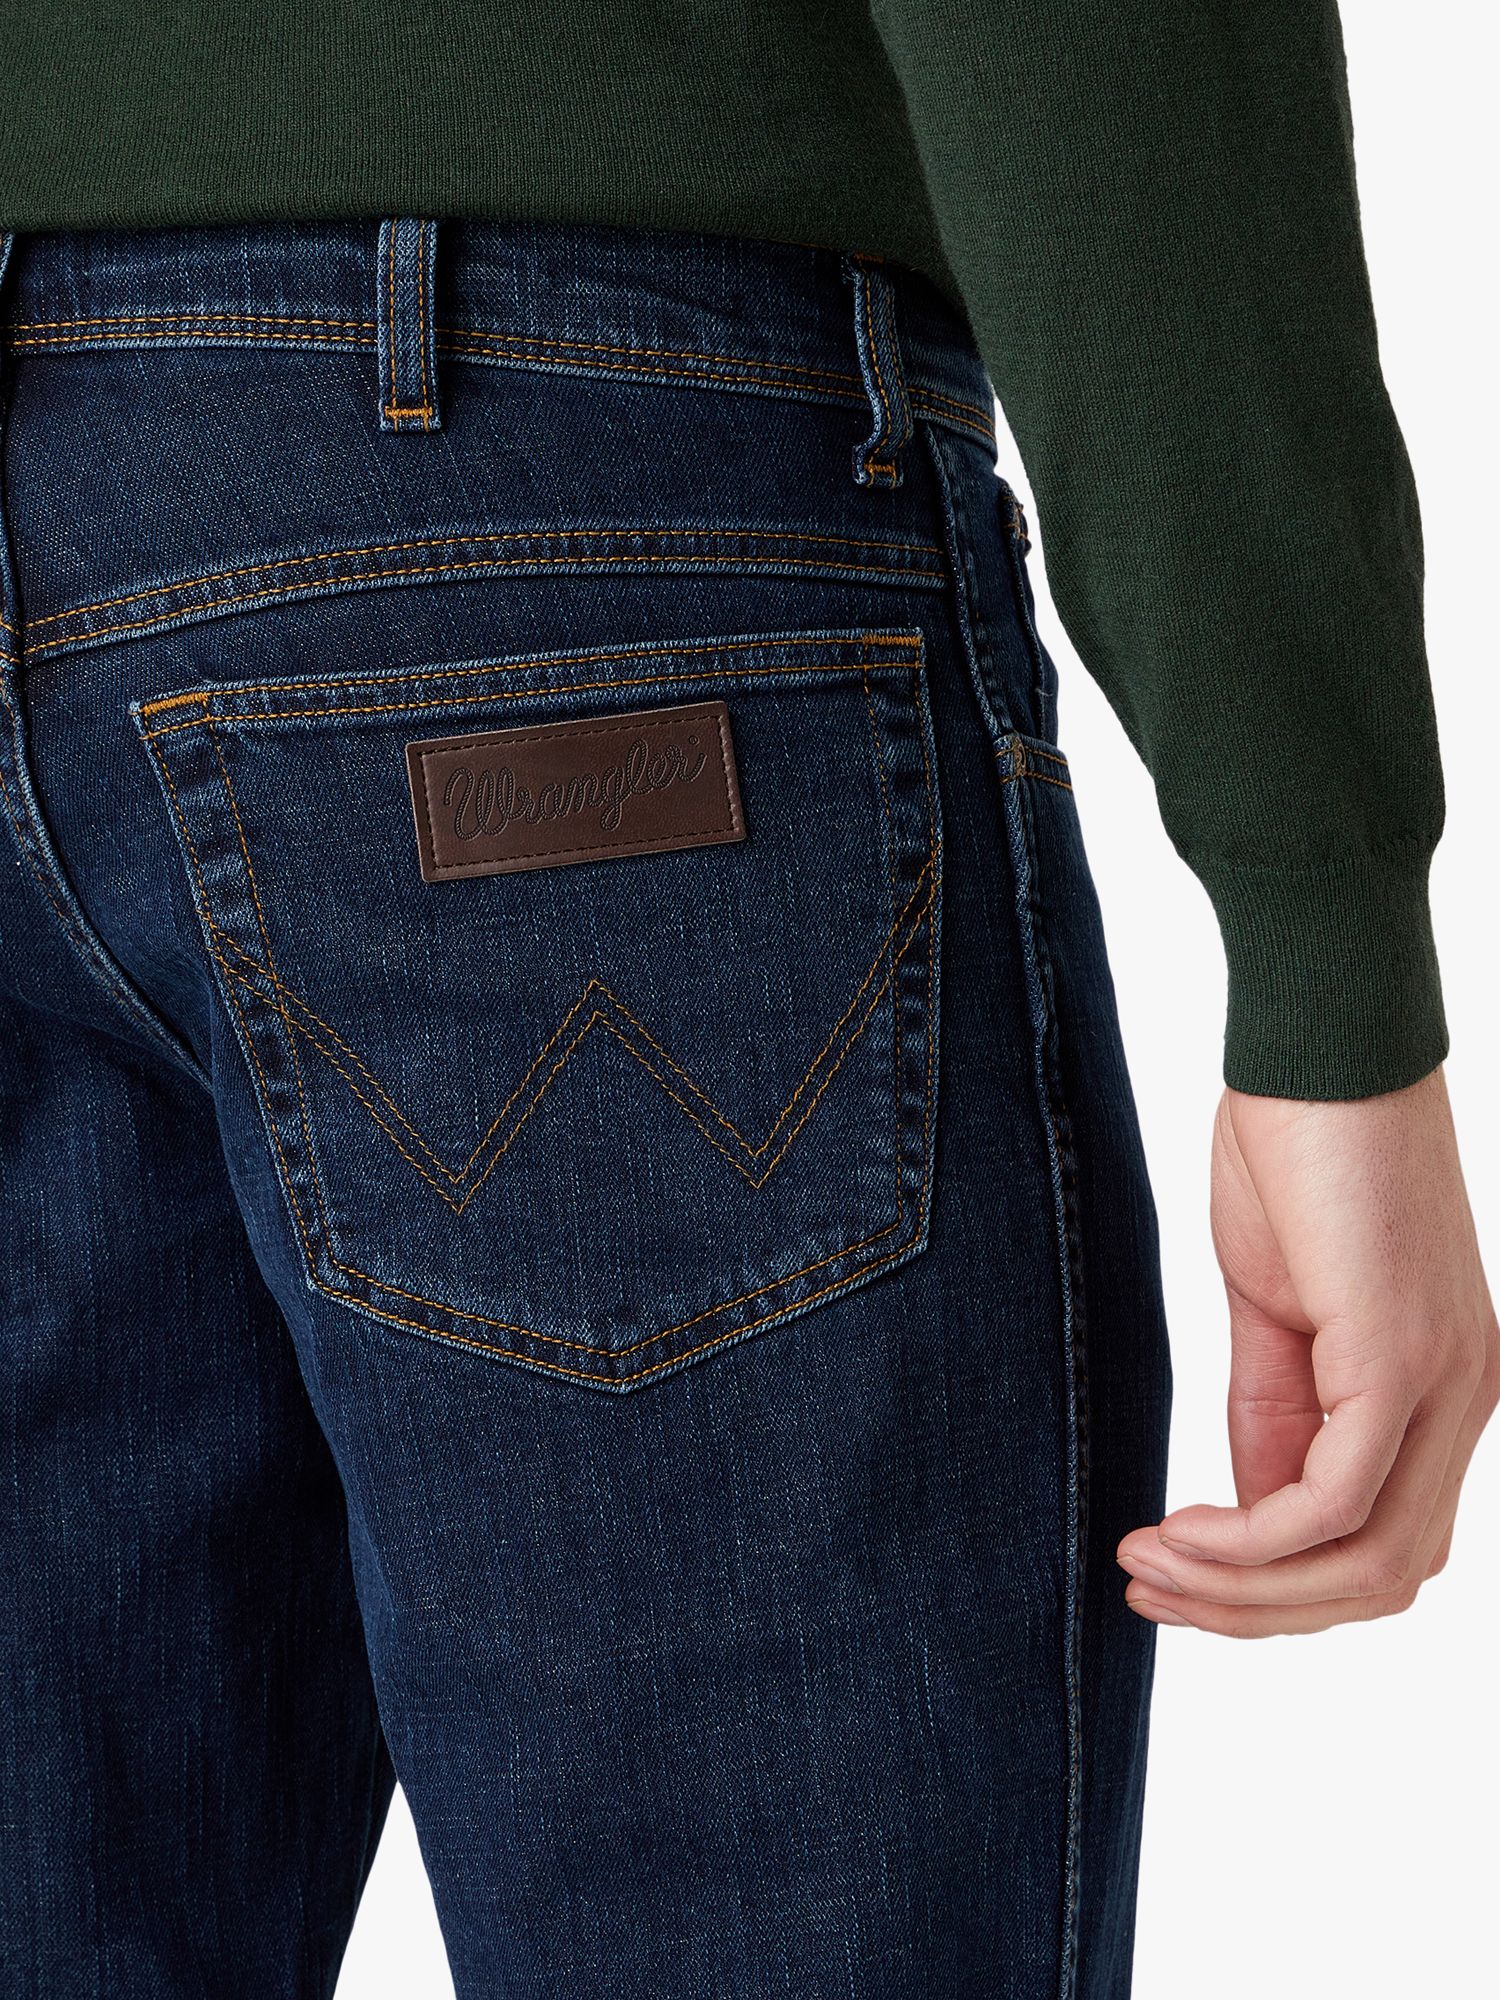 Wrangler Texas Slim Fit Jeans, Blue at Lewis & Partners